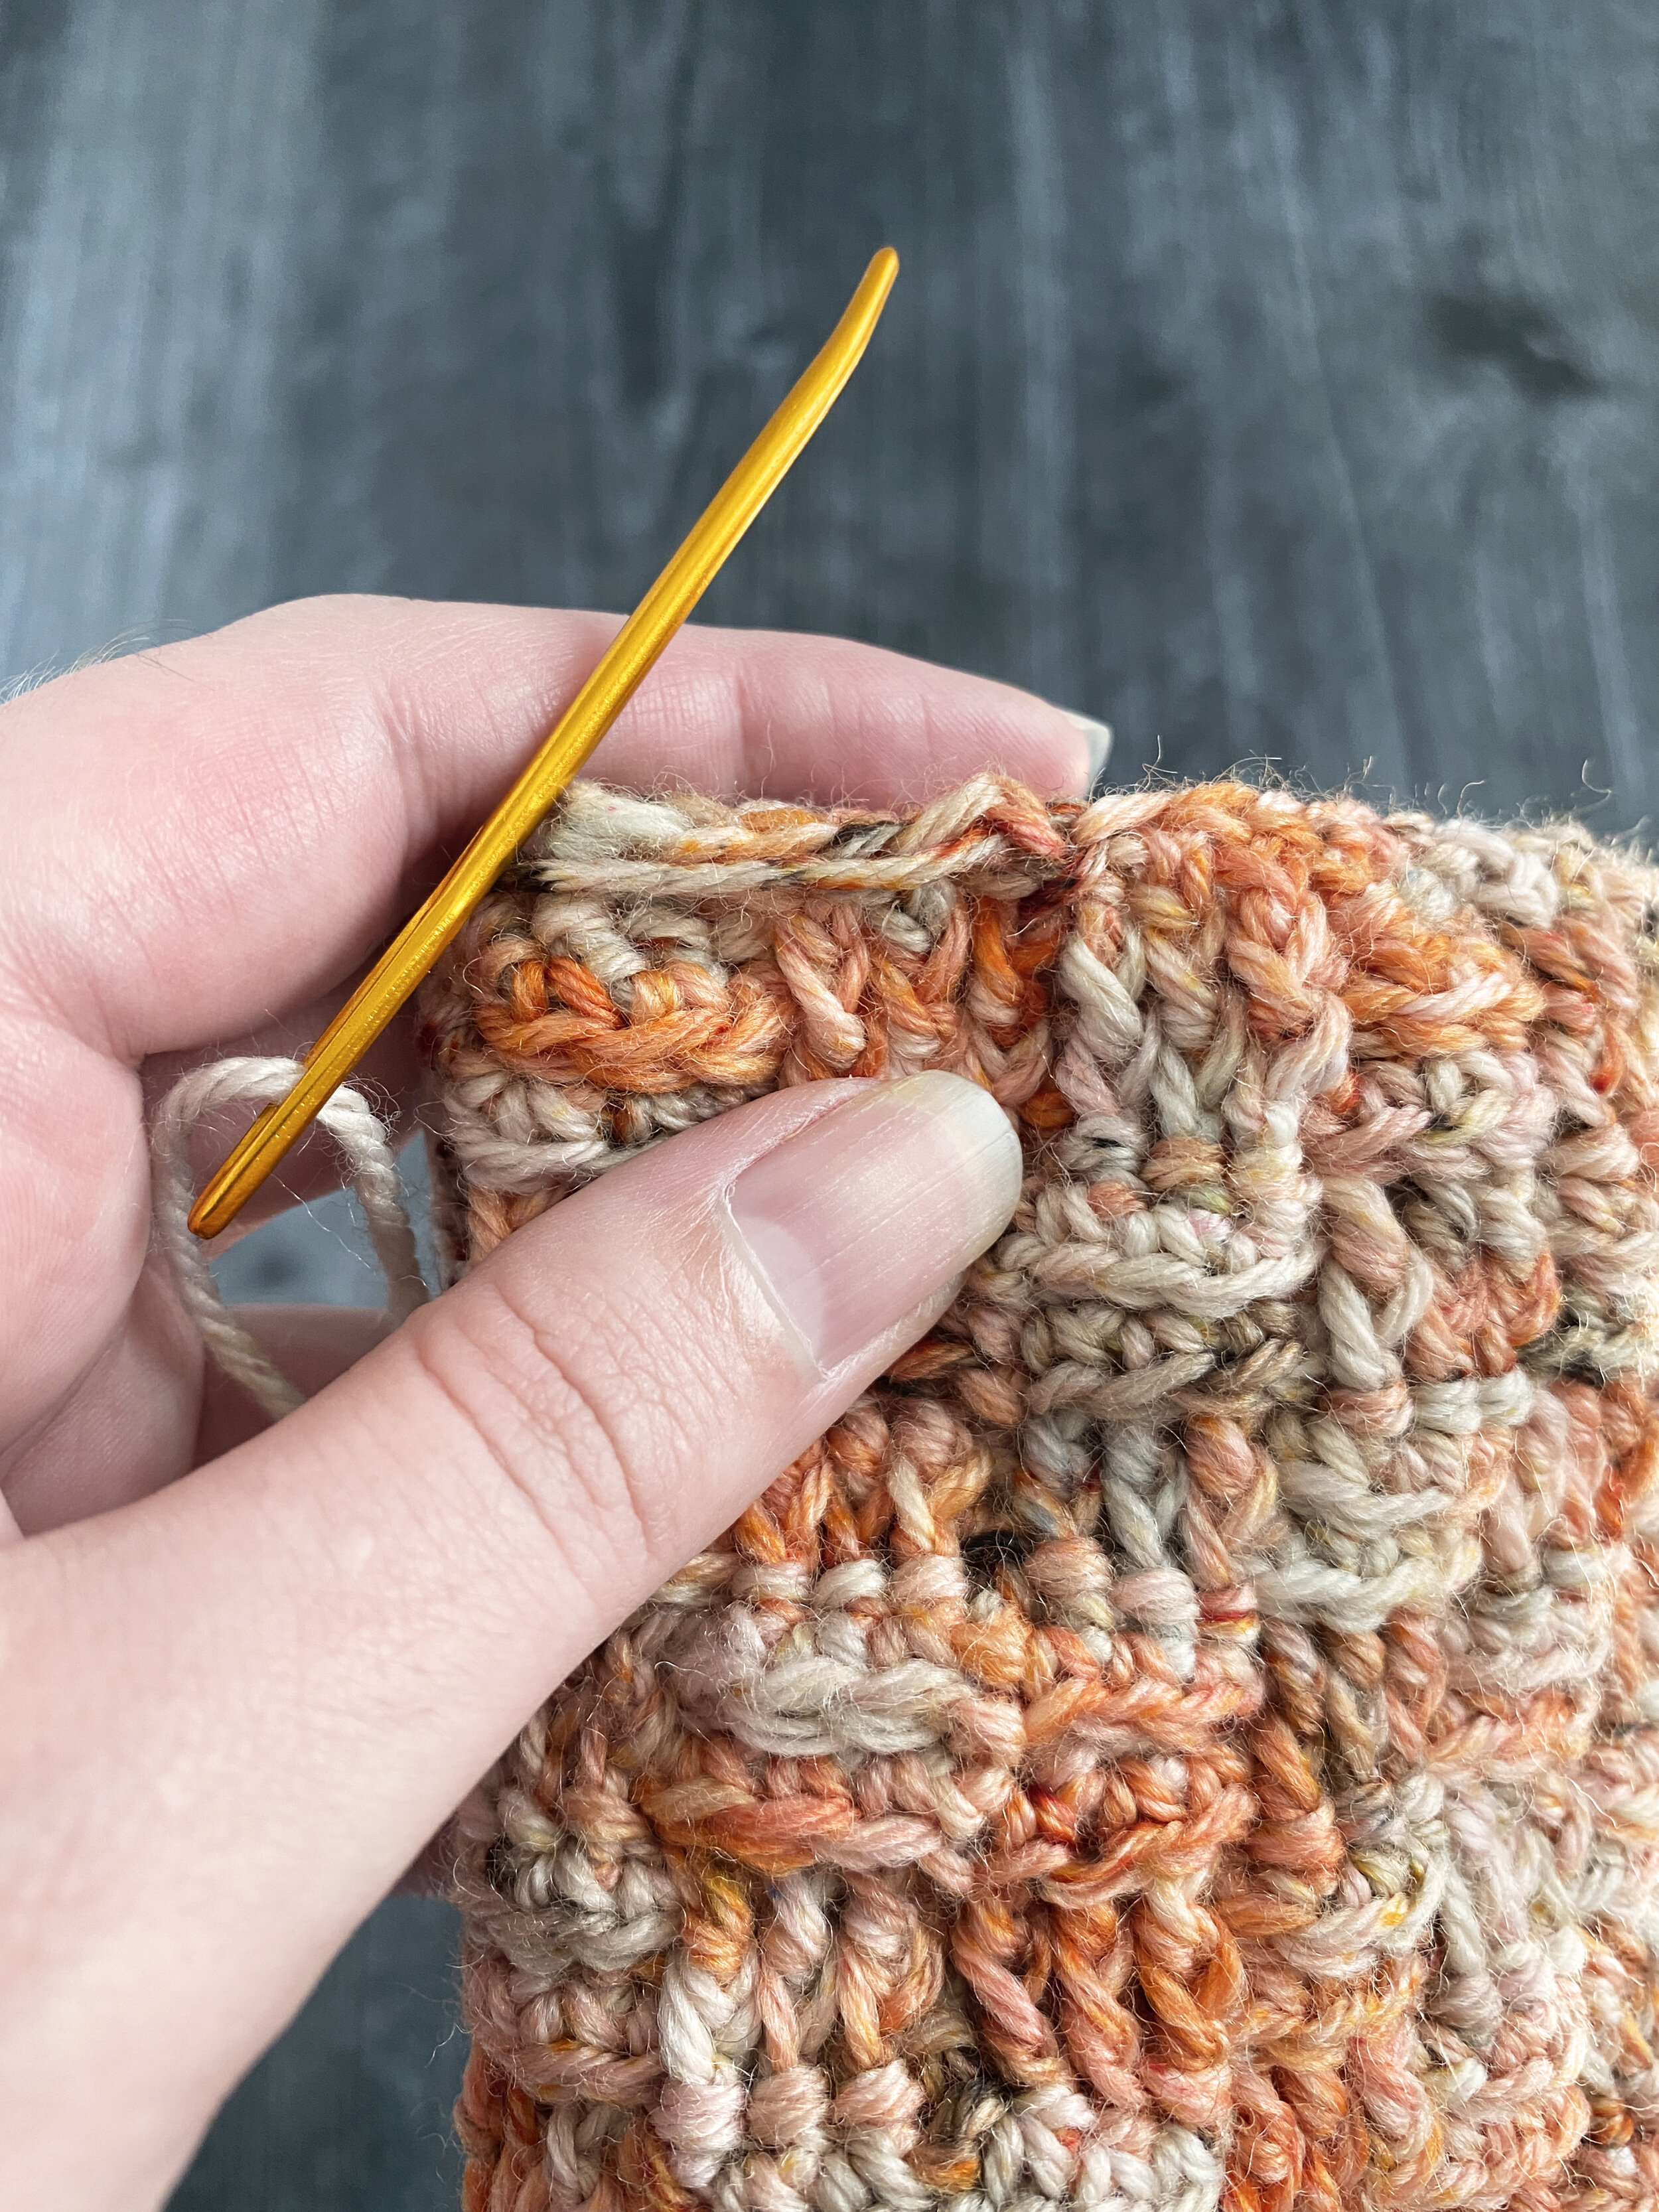 An up-close view of where to thread the yarn through the stitches to shape the pumpkin.